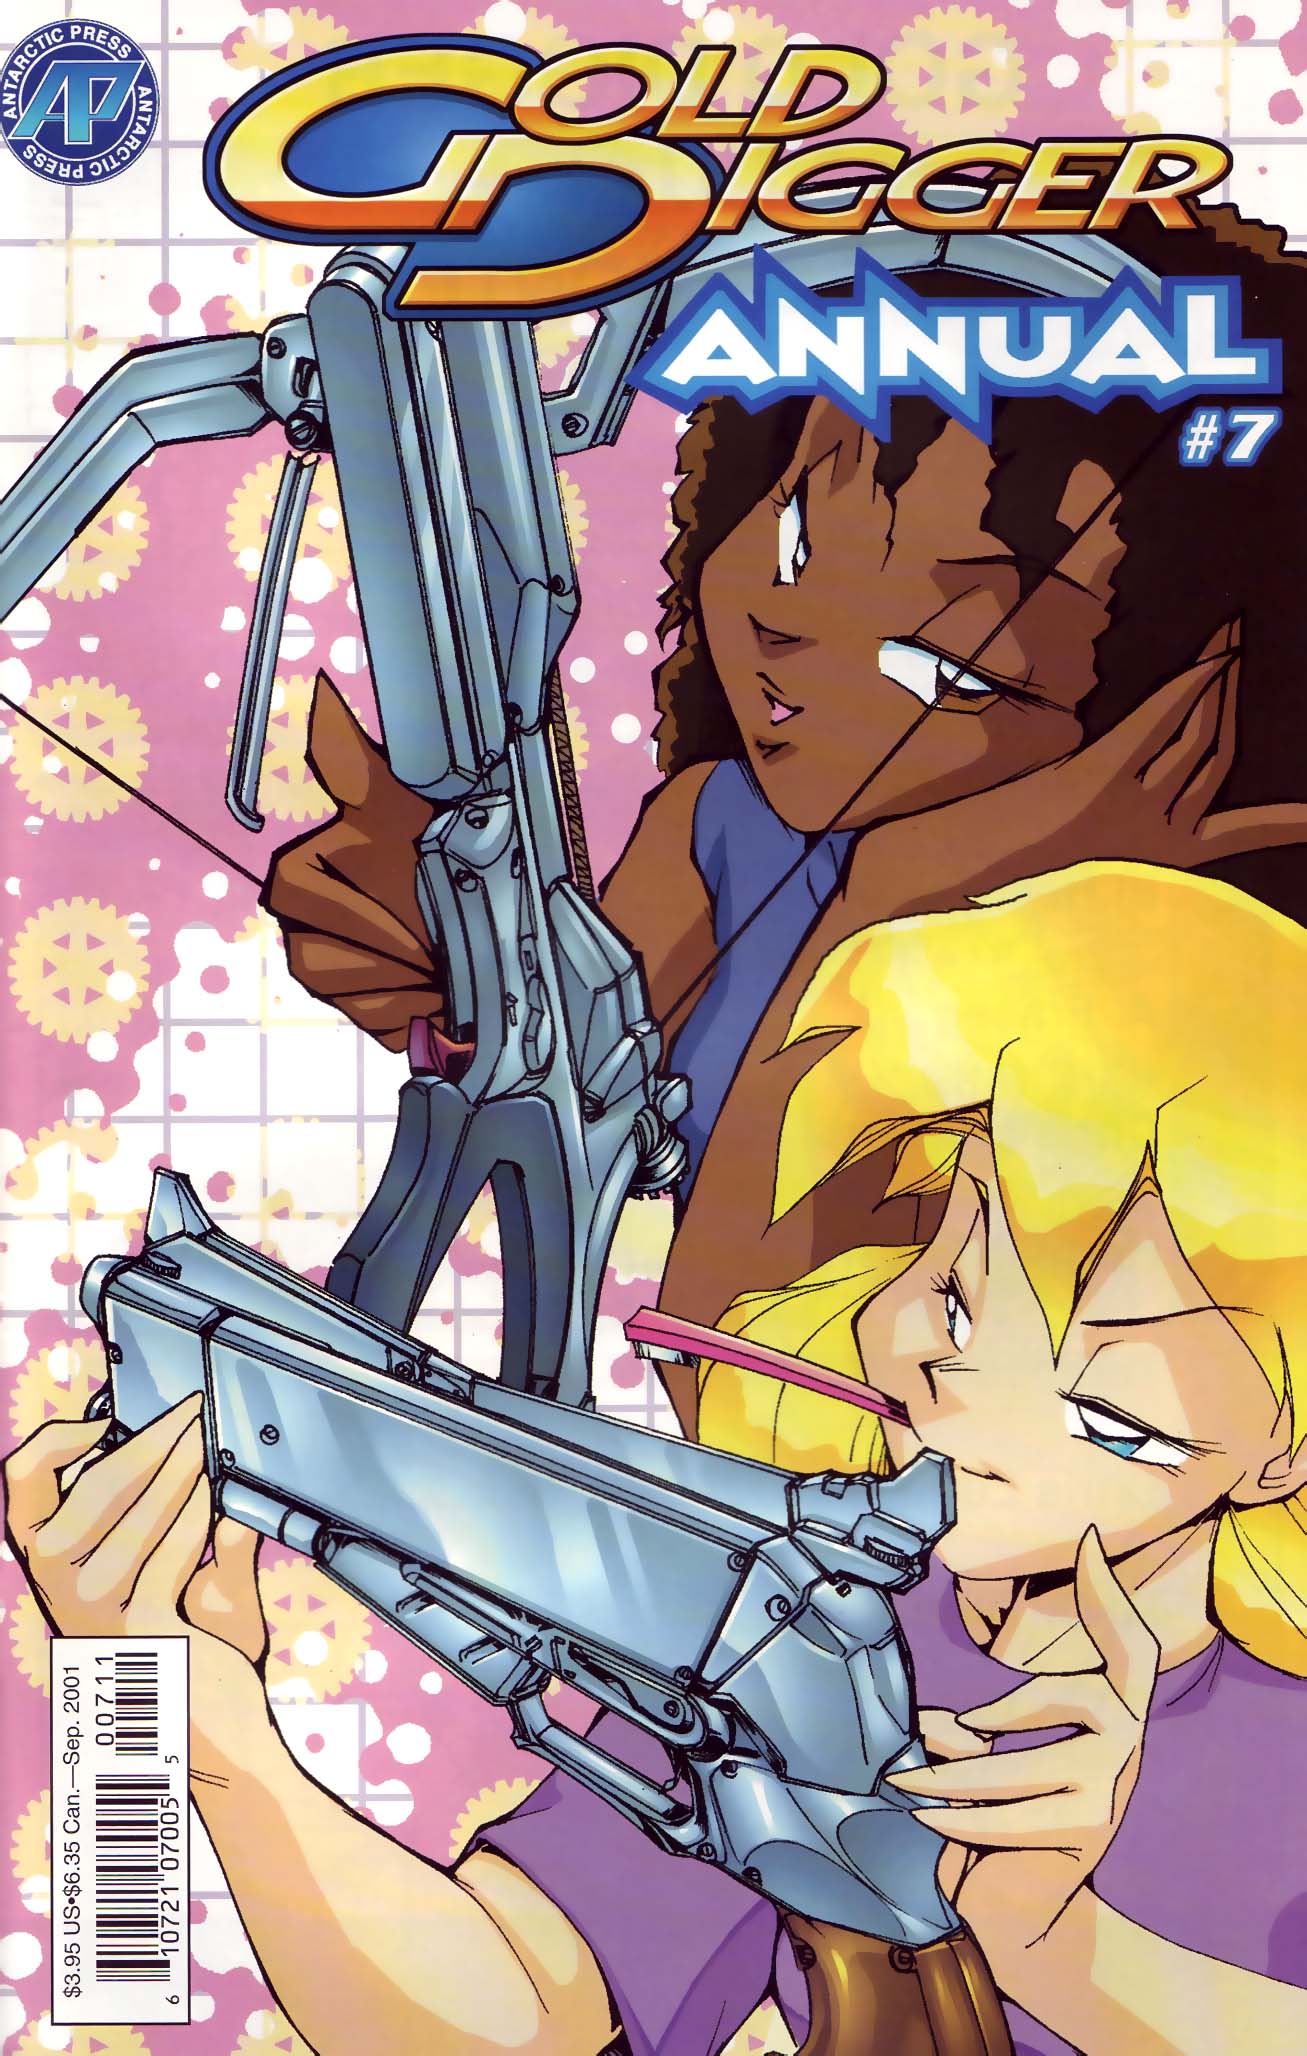 Read online Gold Digger Annual comic -  Issue #7 - 1